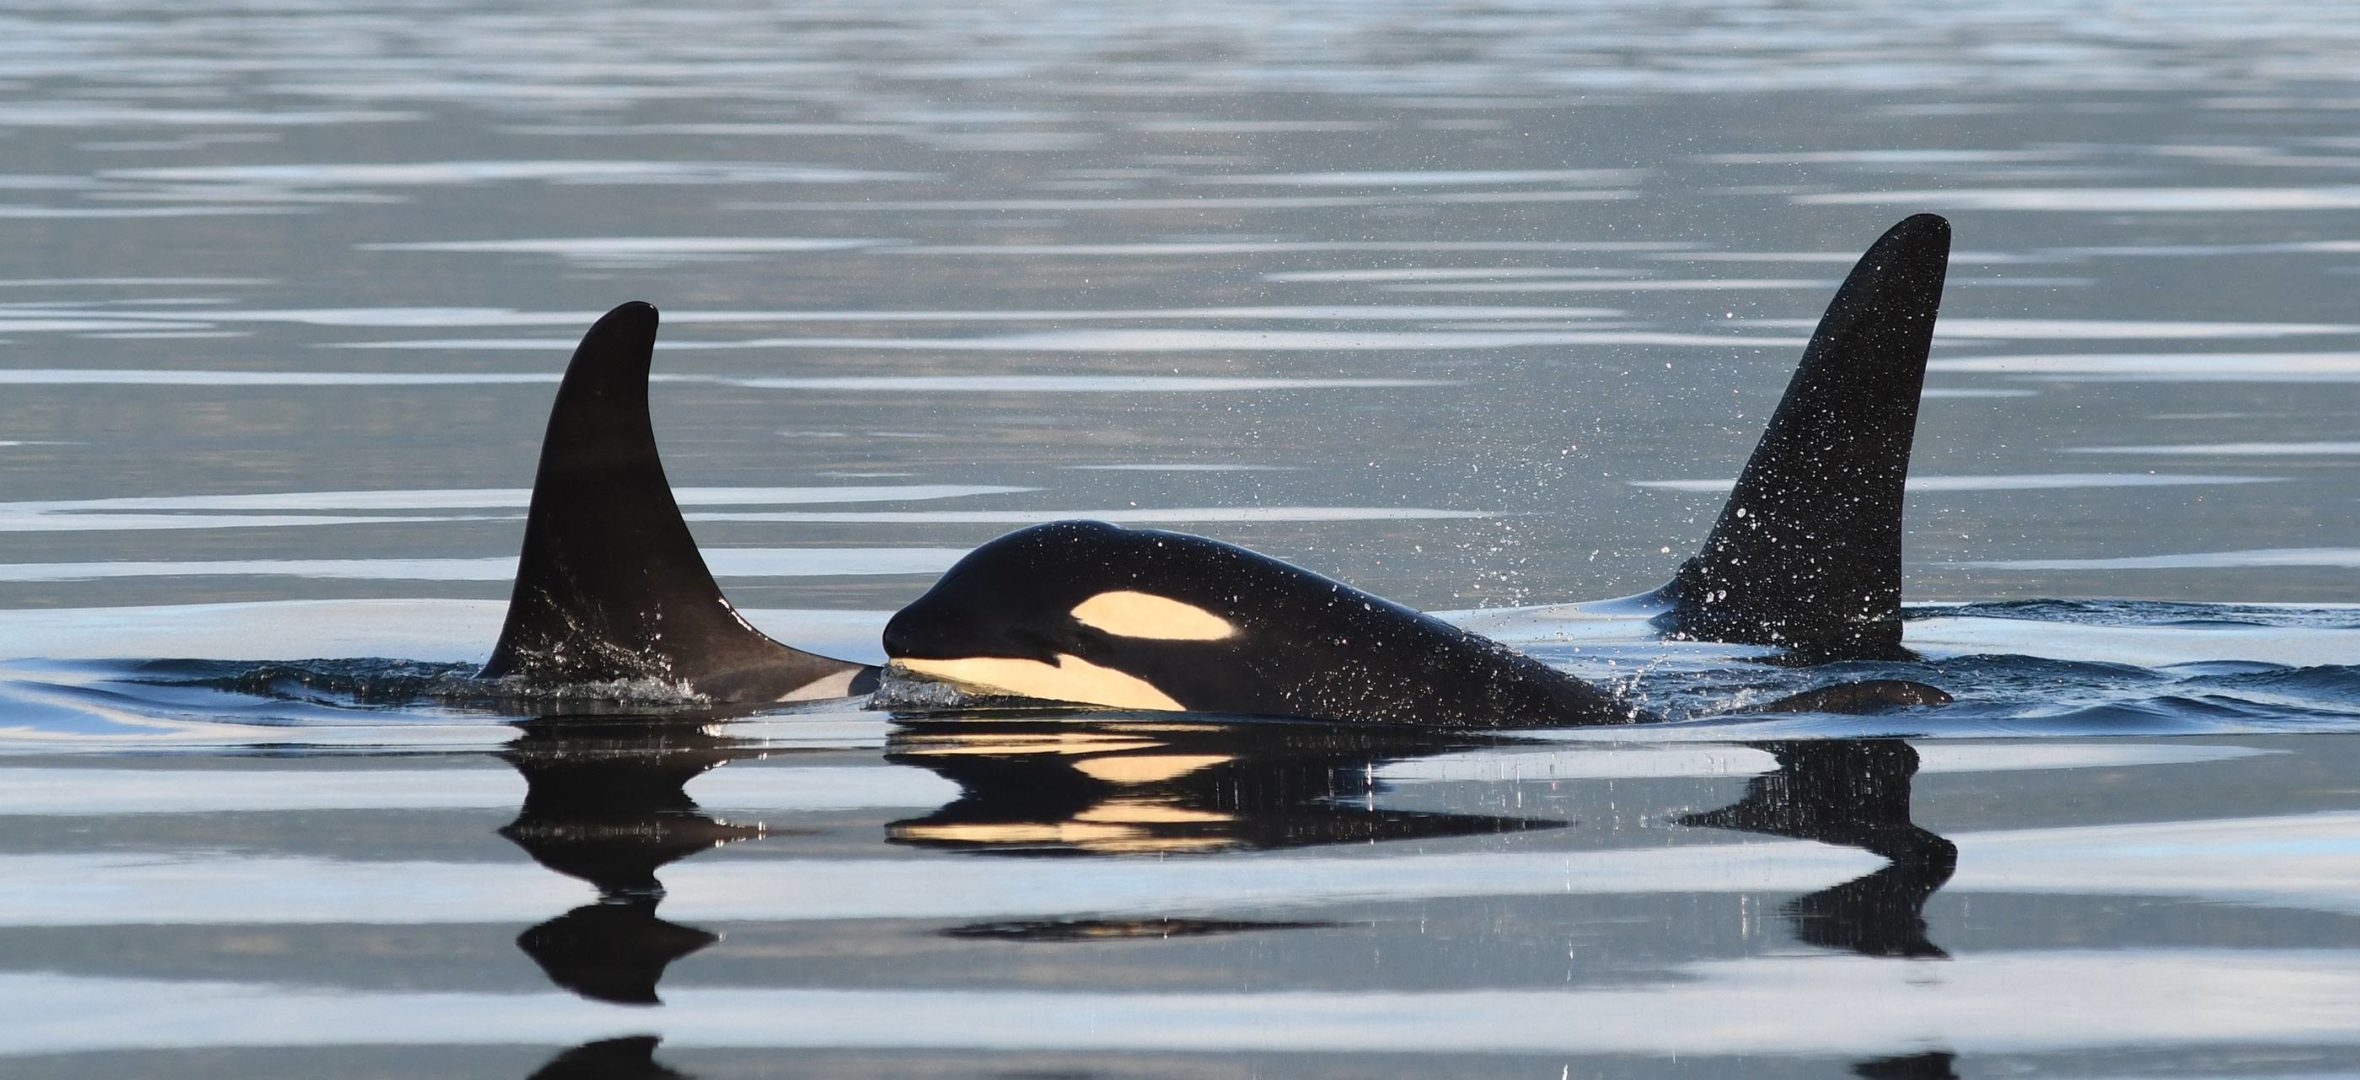 Southern resident orcas in the Salish Sea